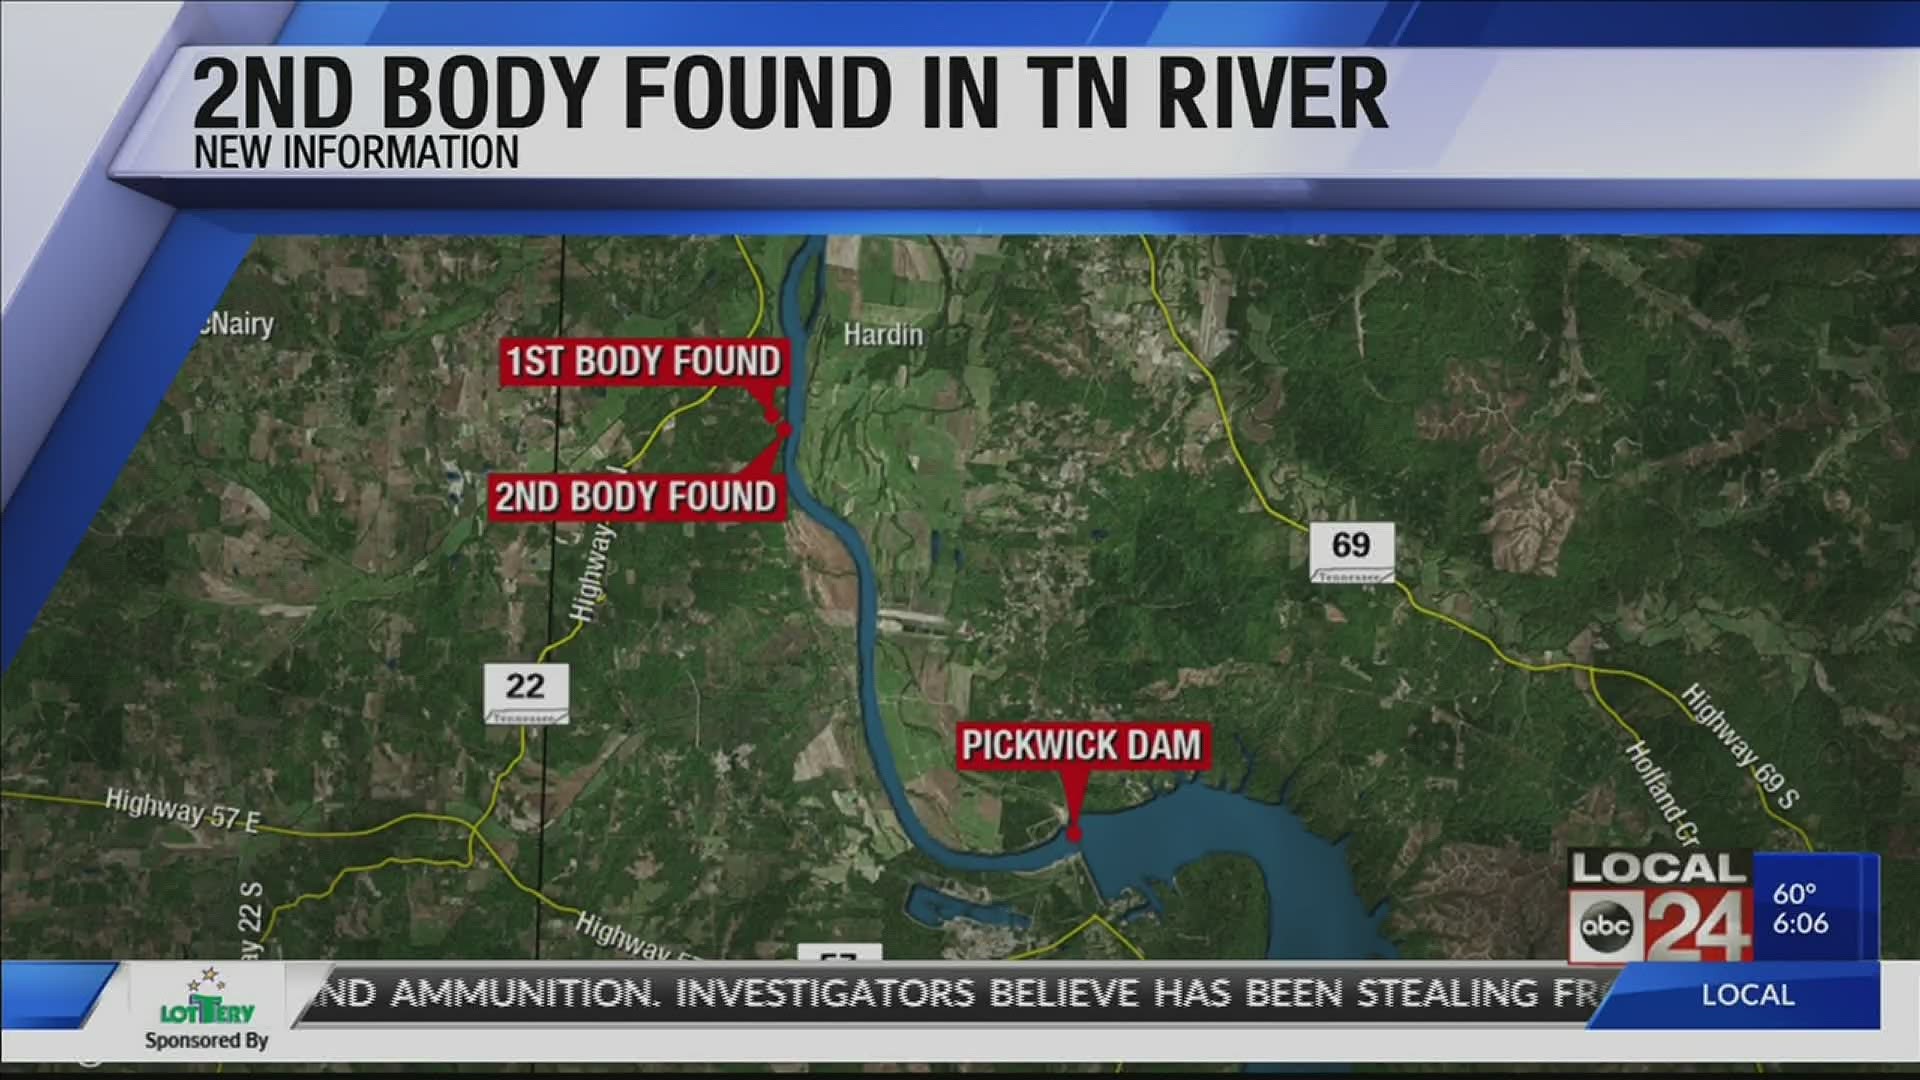 Body has been sent to medical examiner’s office in Memphis for autopsy and identification.